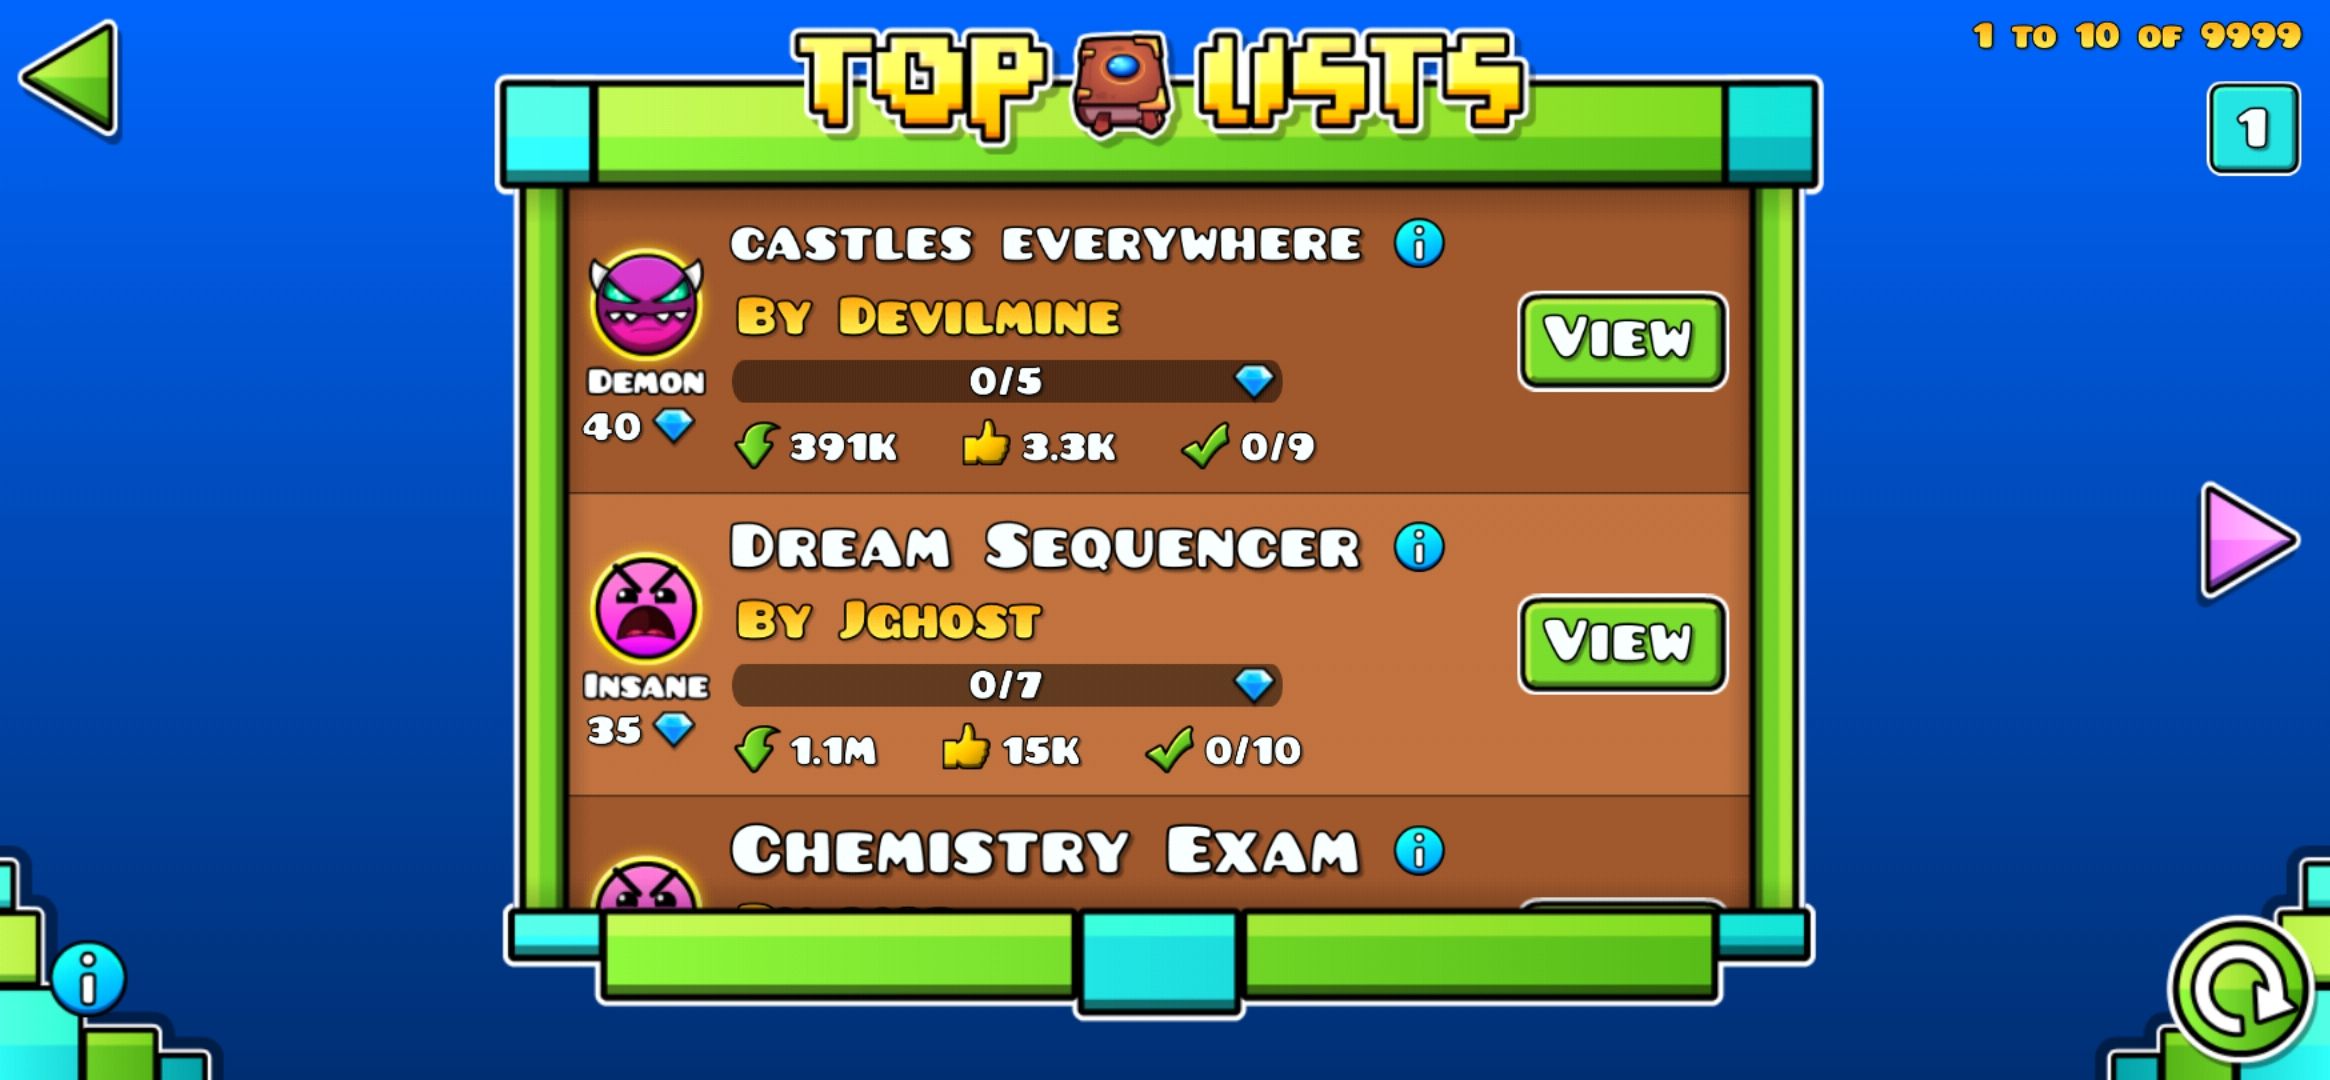 Lists in Geometry Dash